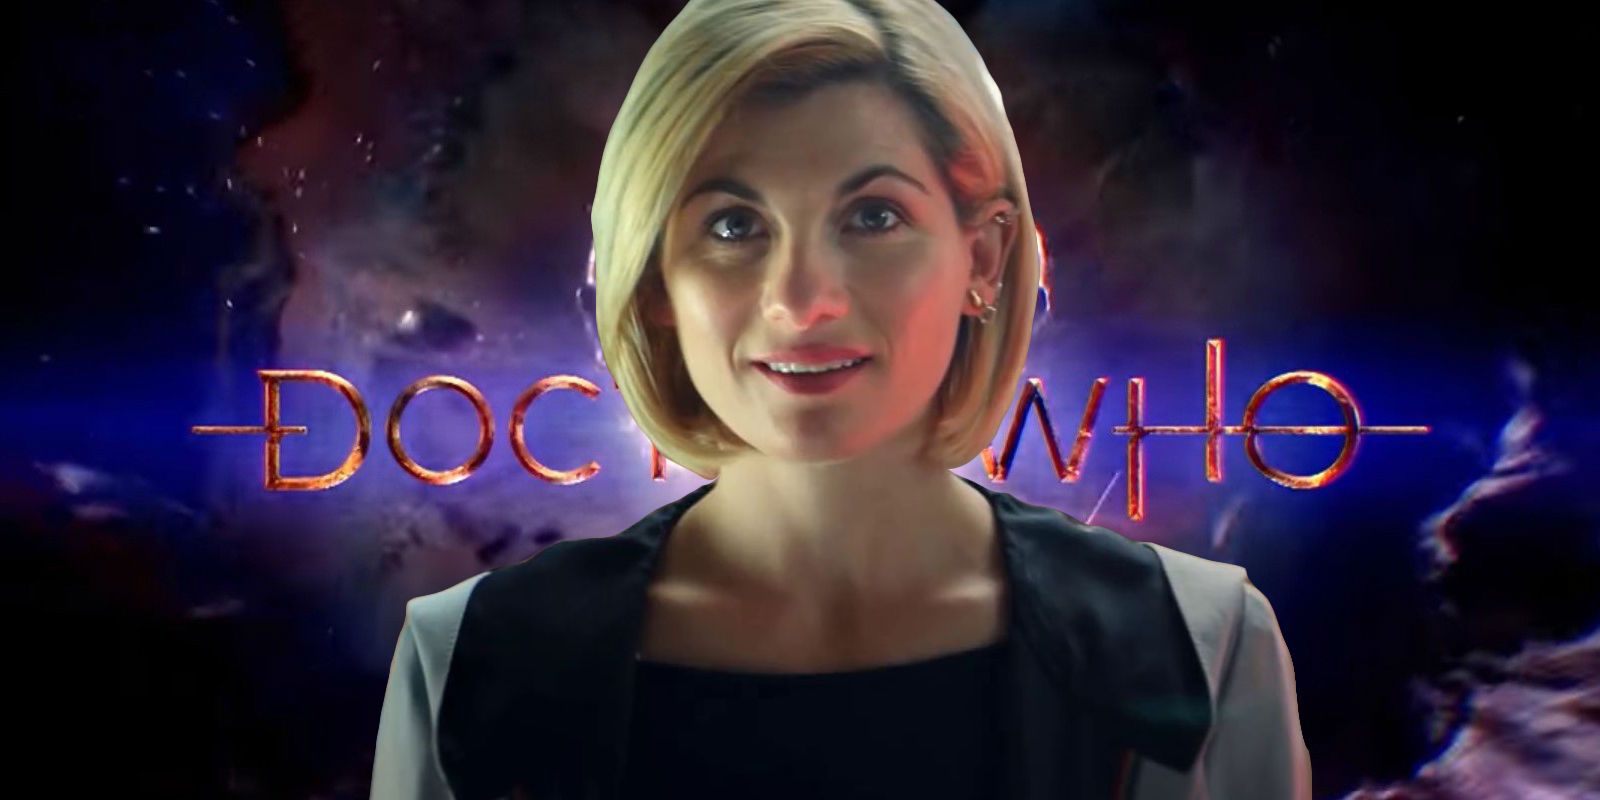 Doctor Who, Jodie Whittaker, reportedly leaving after season 13